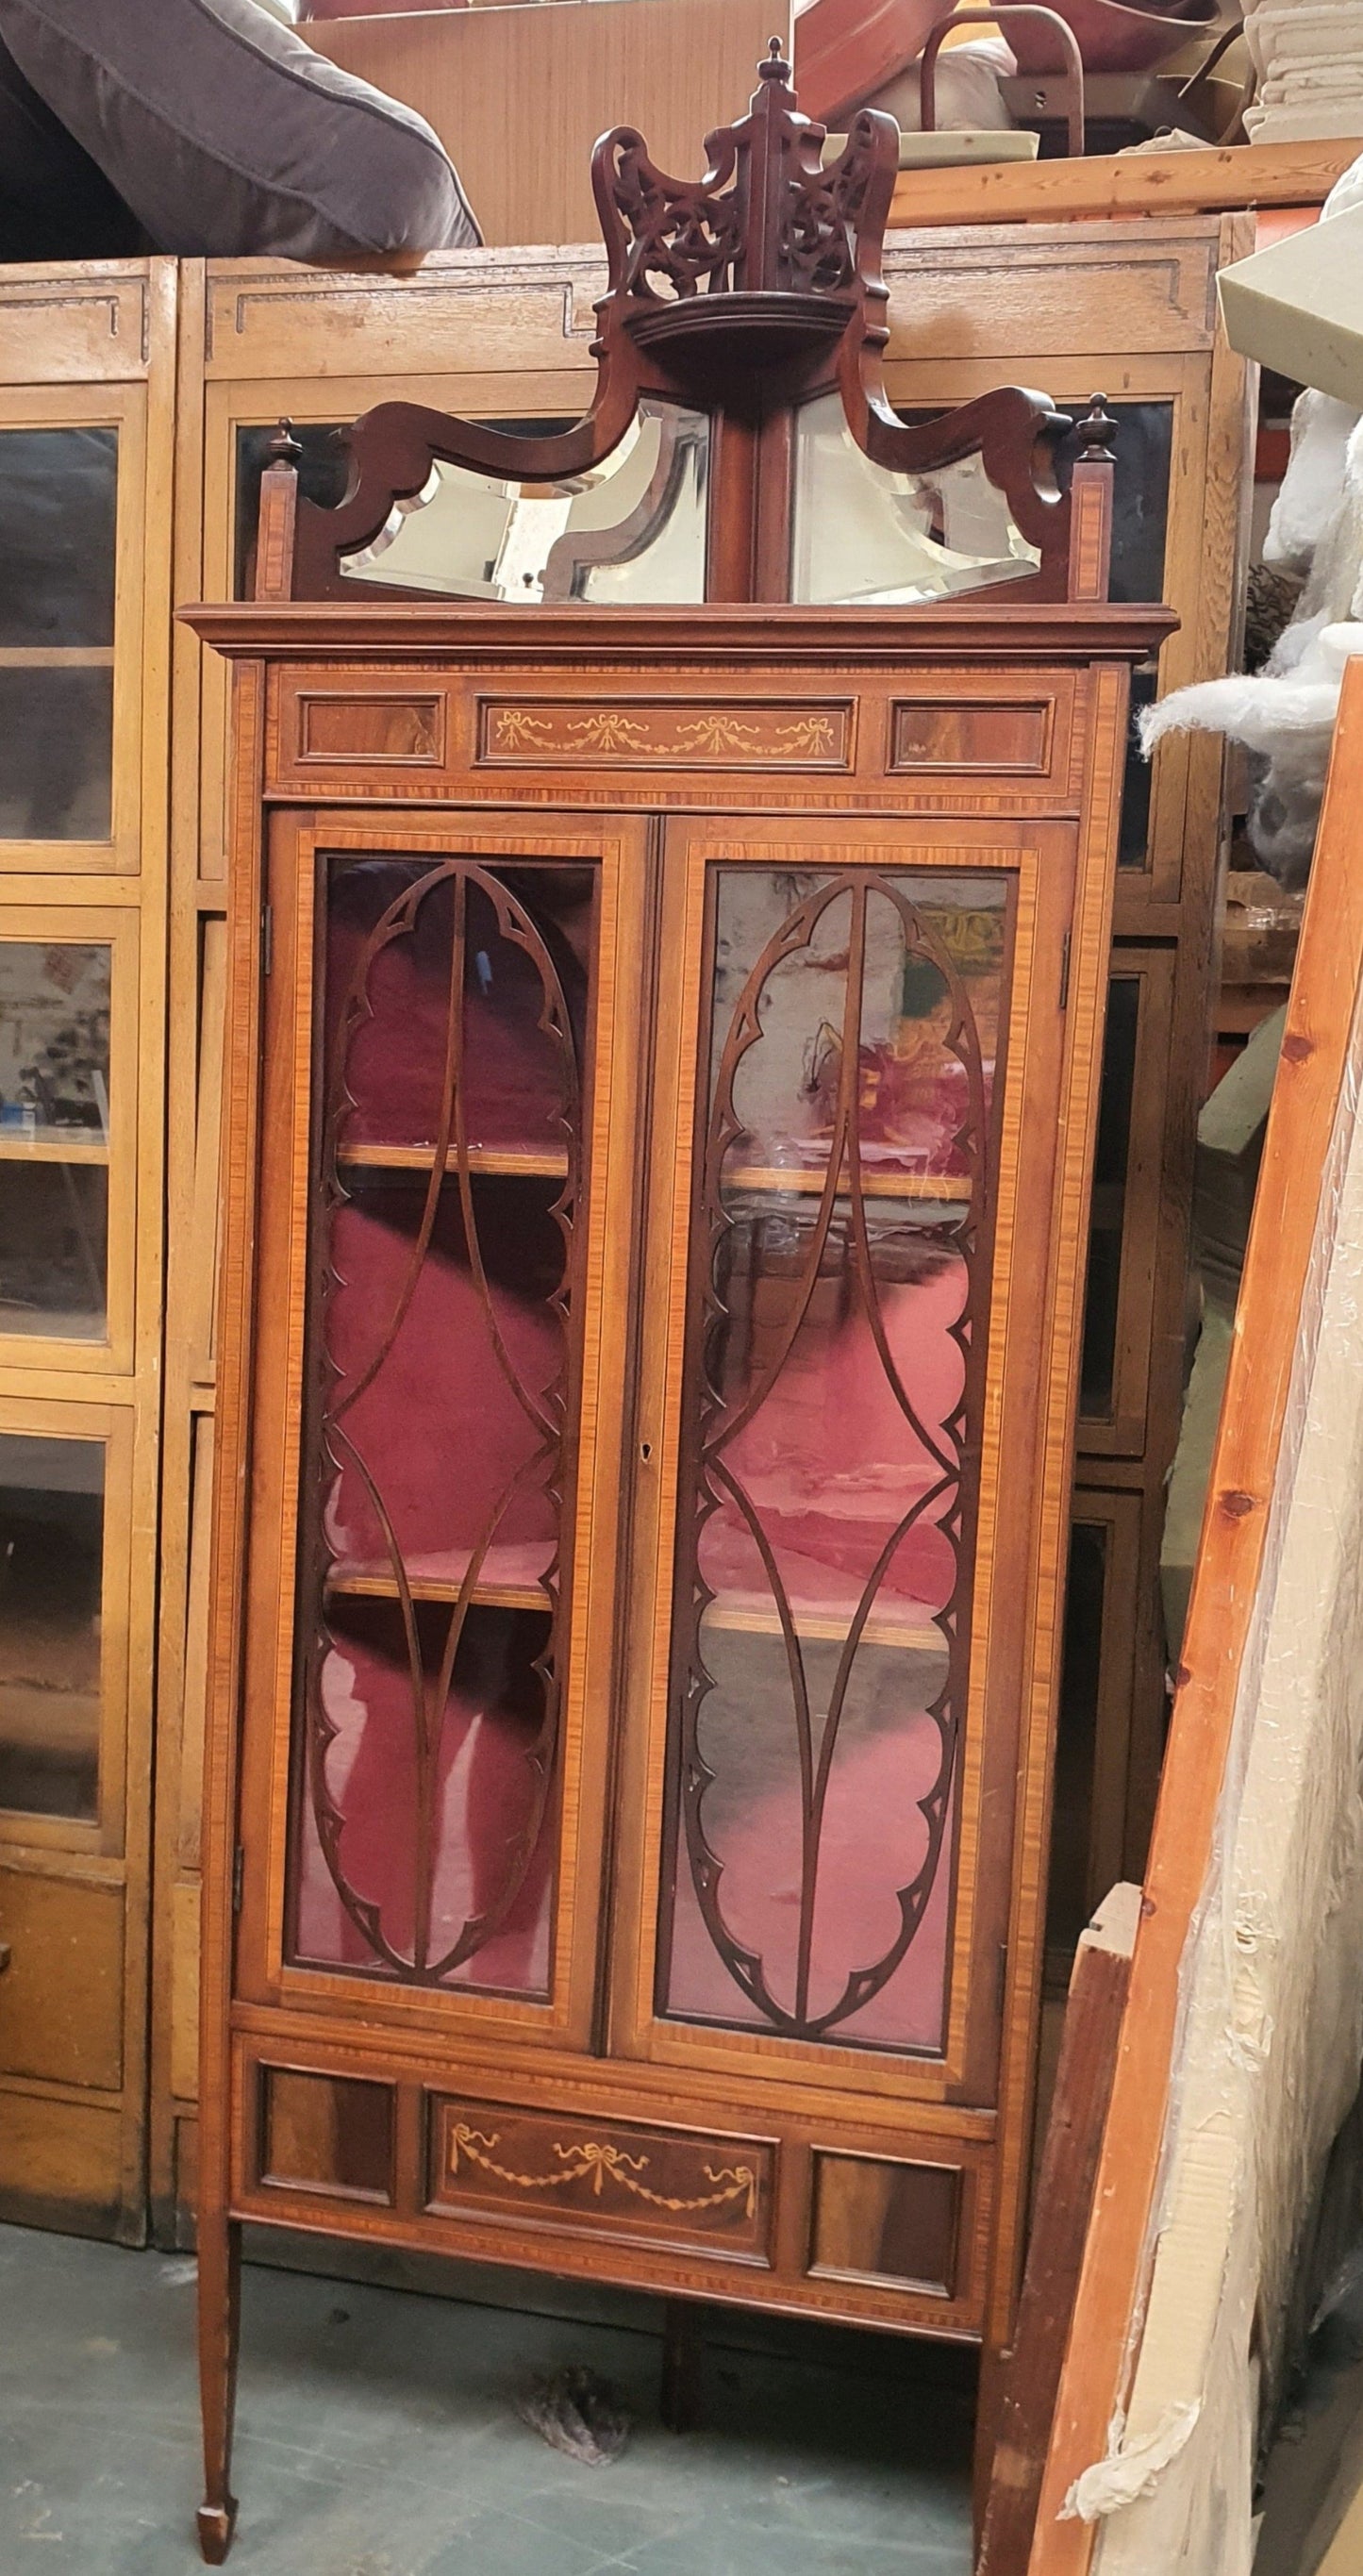  Antique Mahogany Inlaid Corner display cabinet with crown Handmade in England